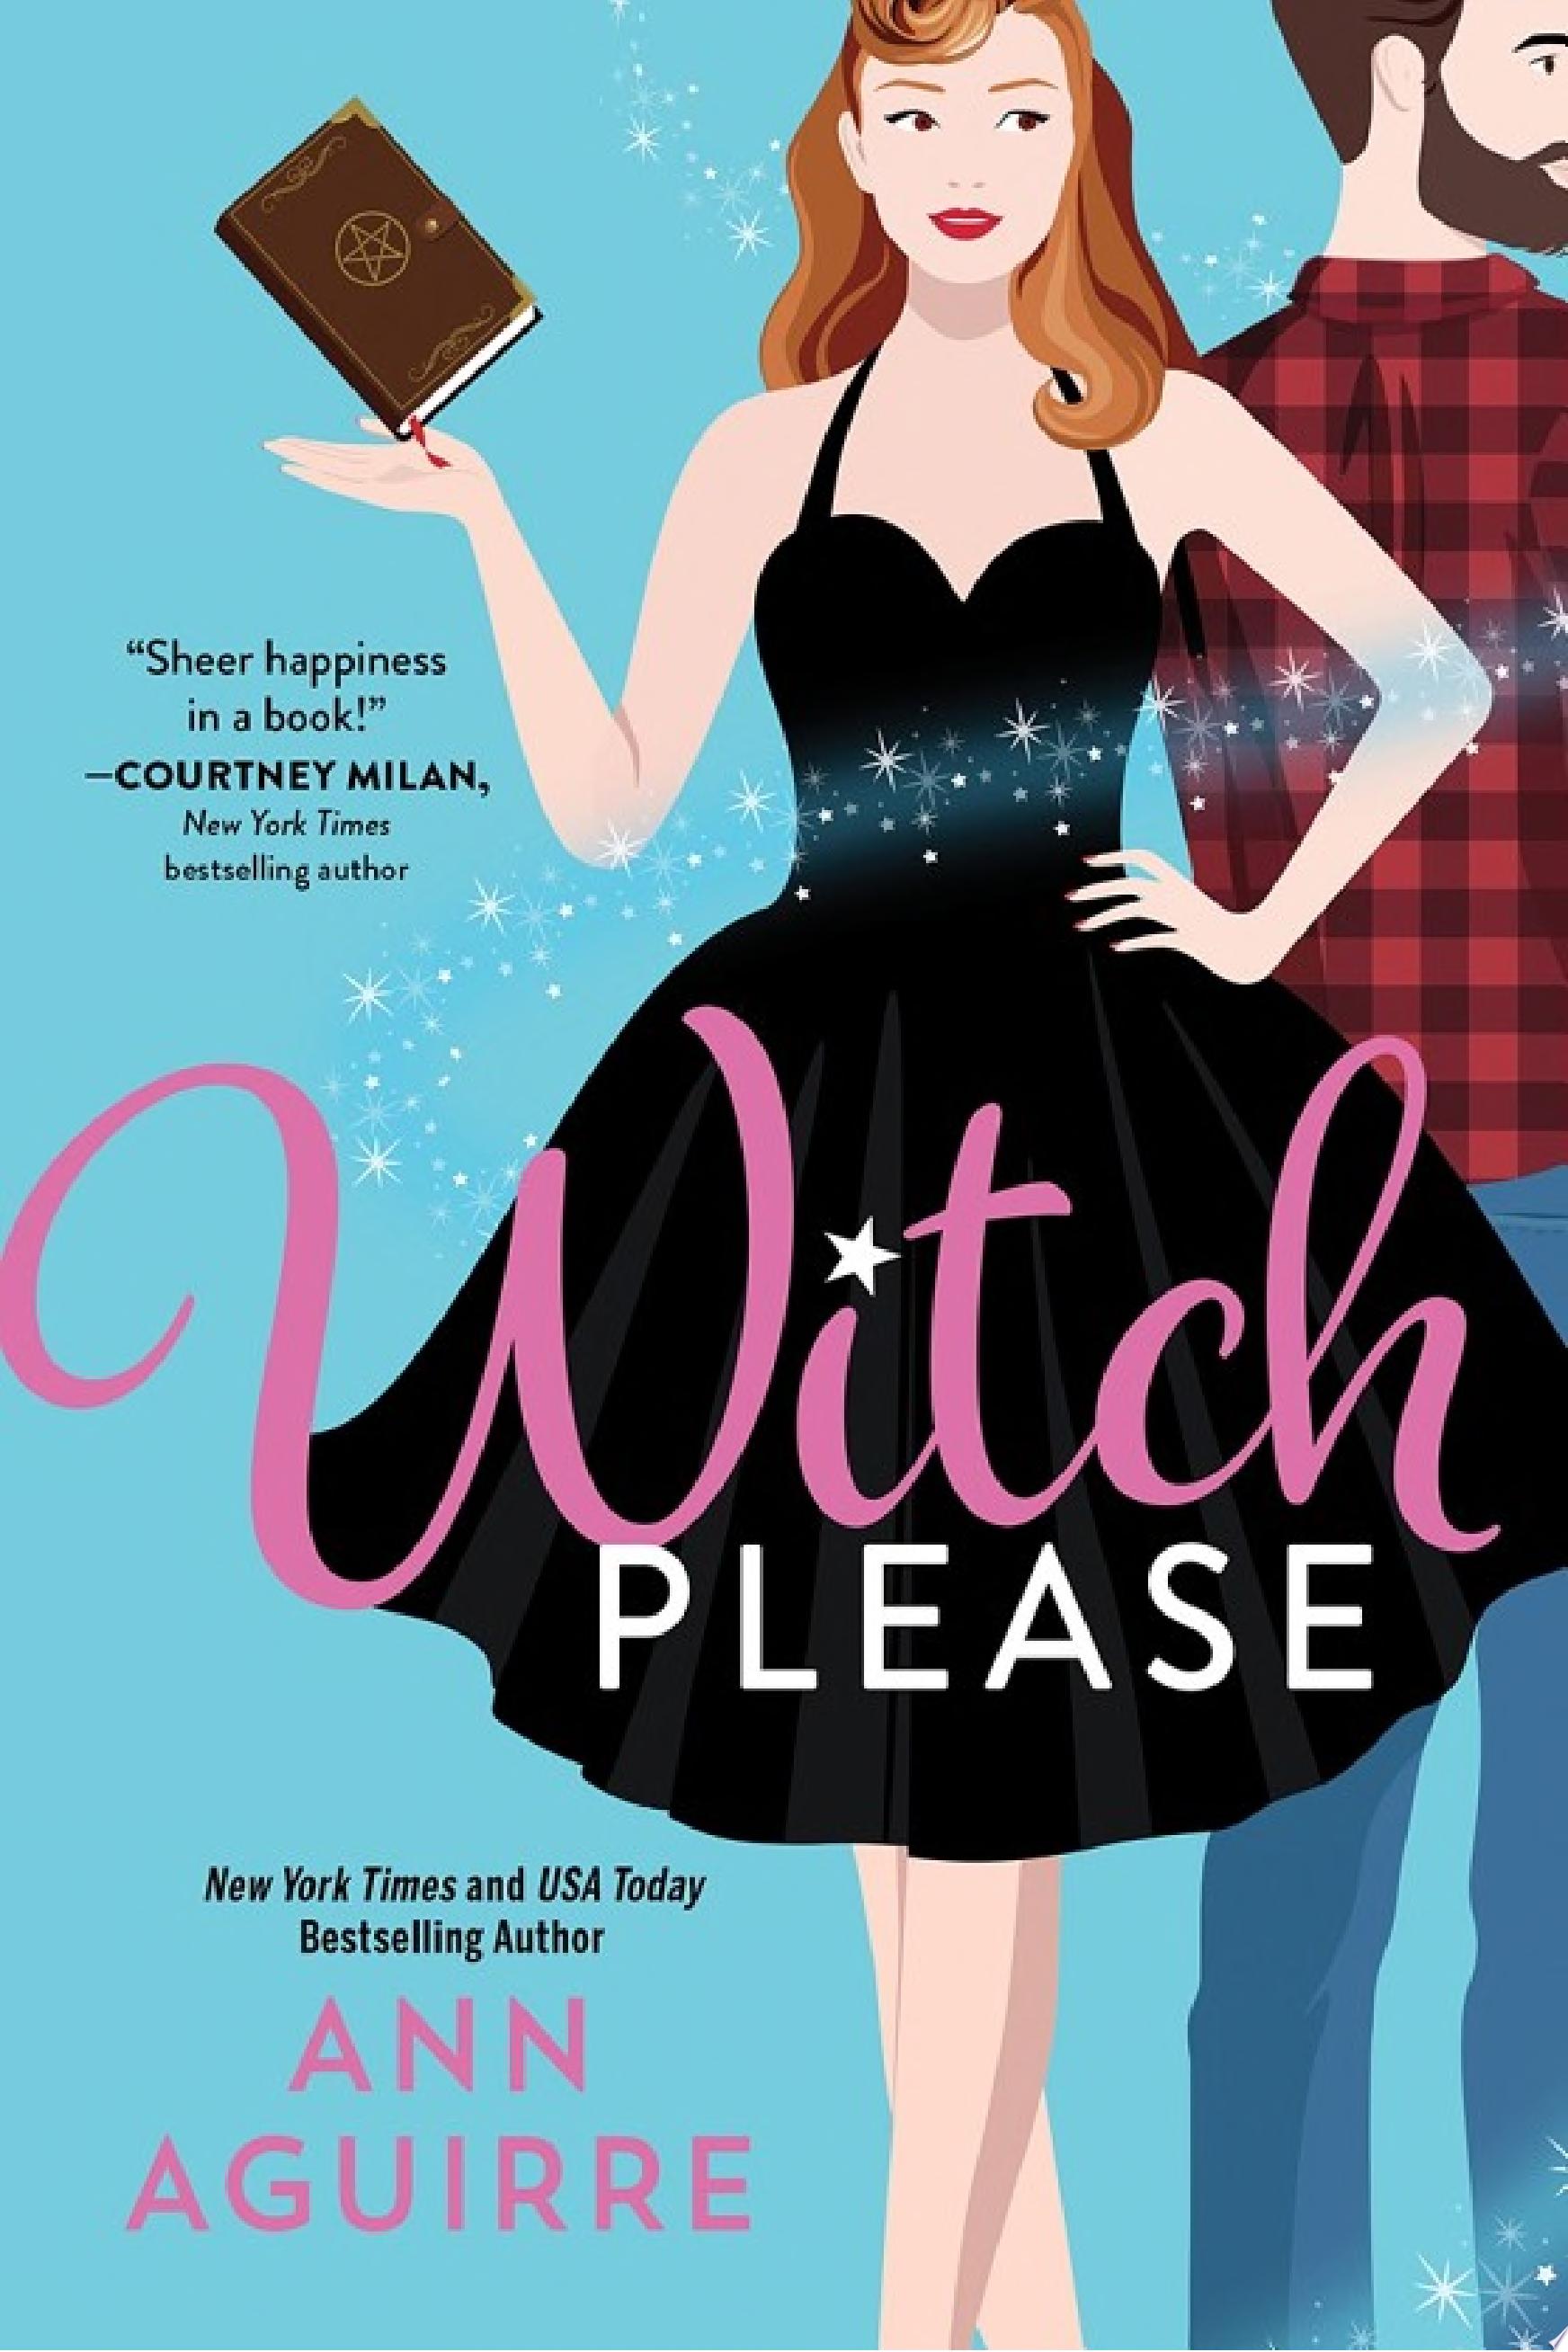 Image for "Witch Please"